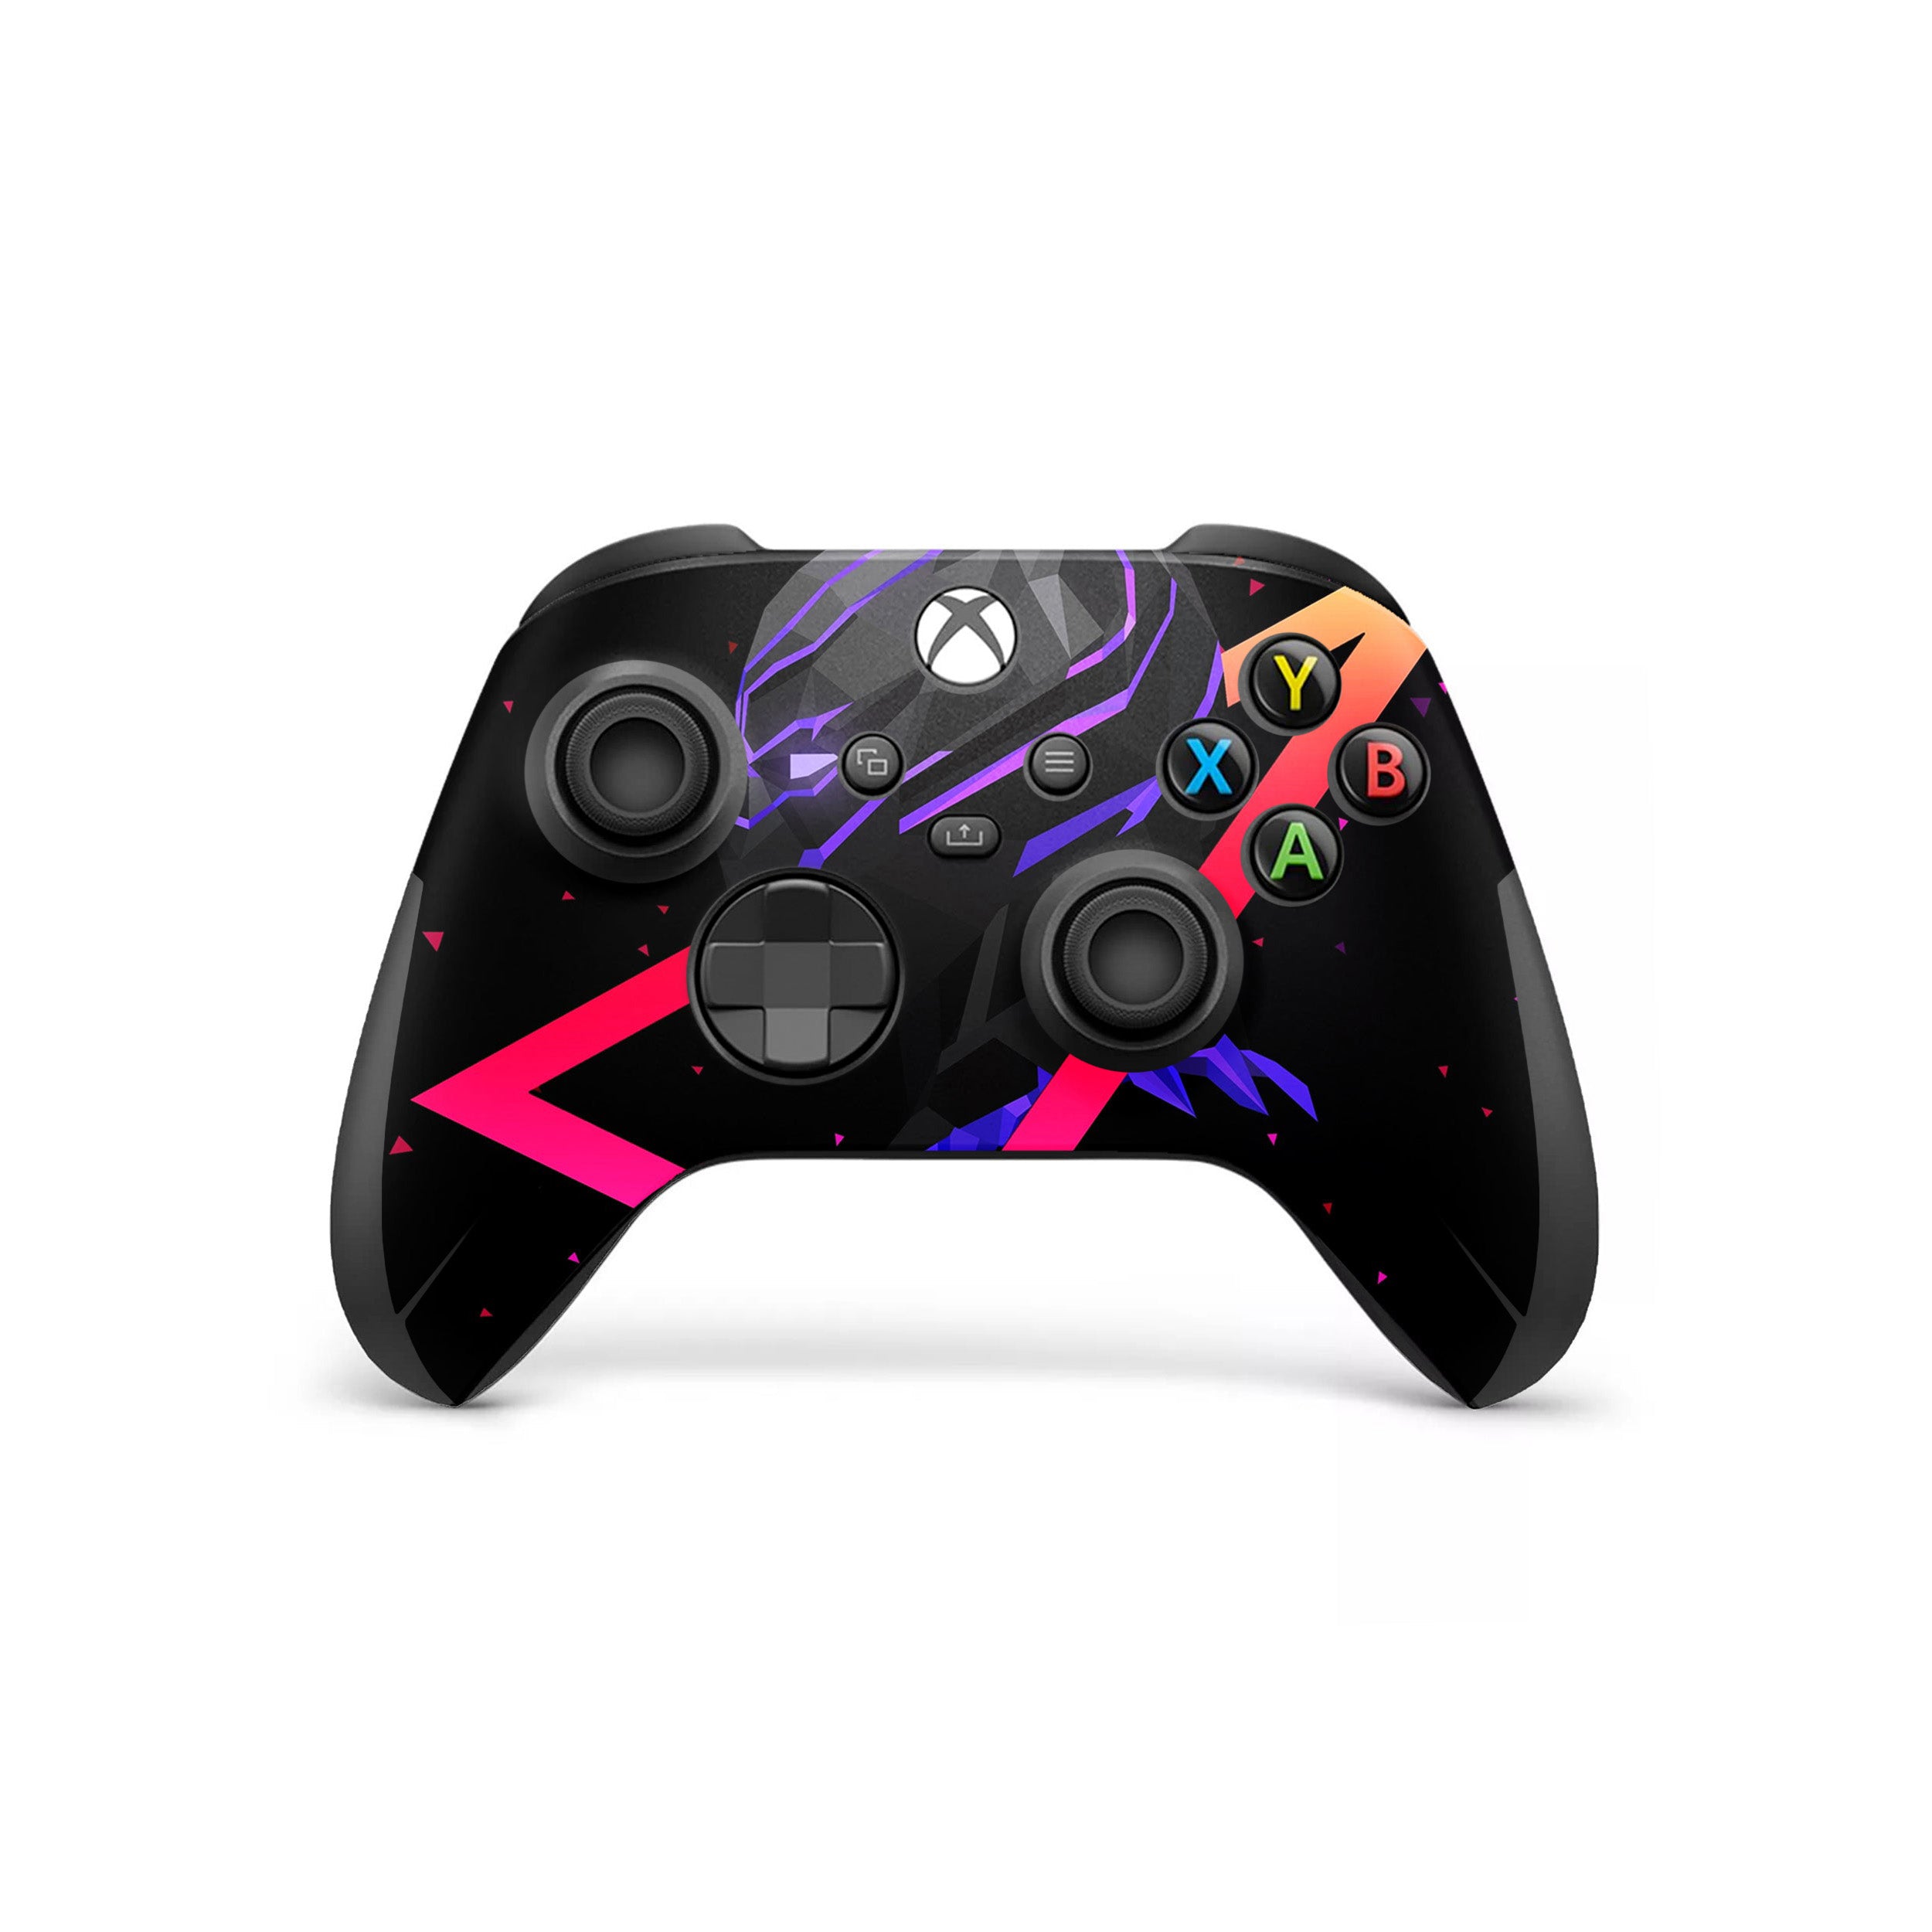 A video game skin featuring a Marvel Comics Black Panther design for the Xbox Wireless Controller.